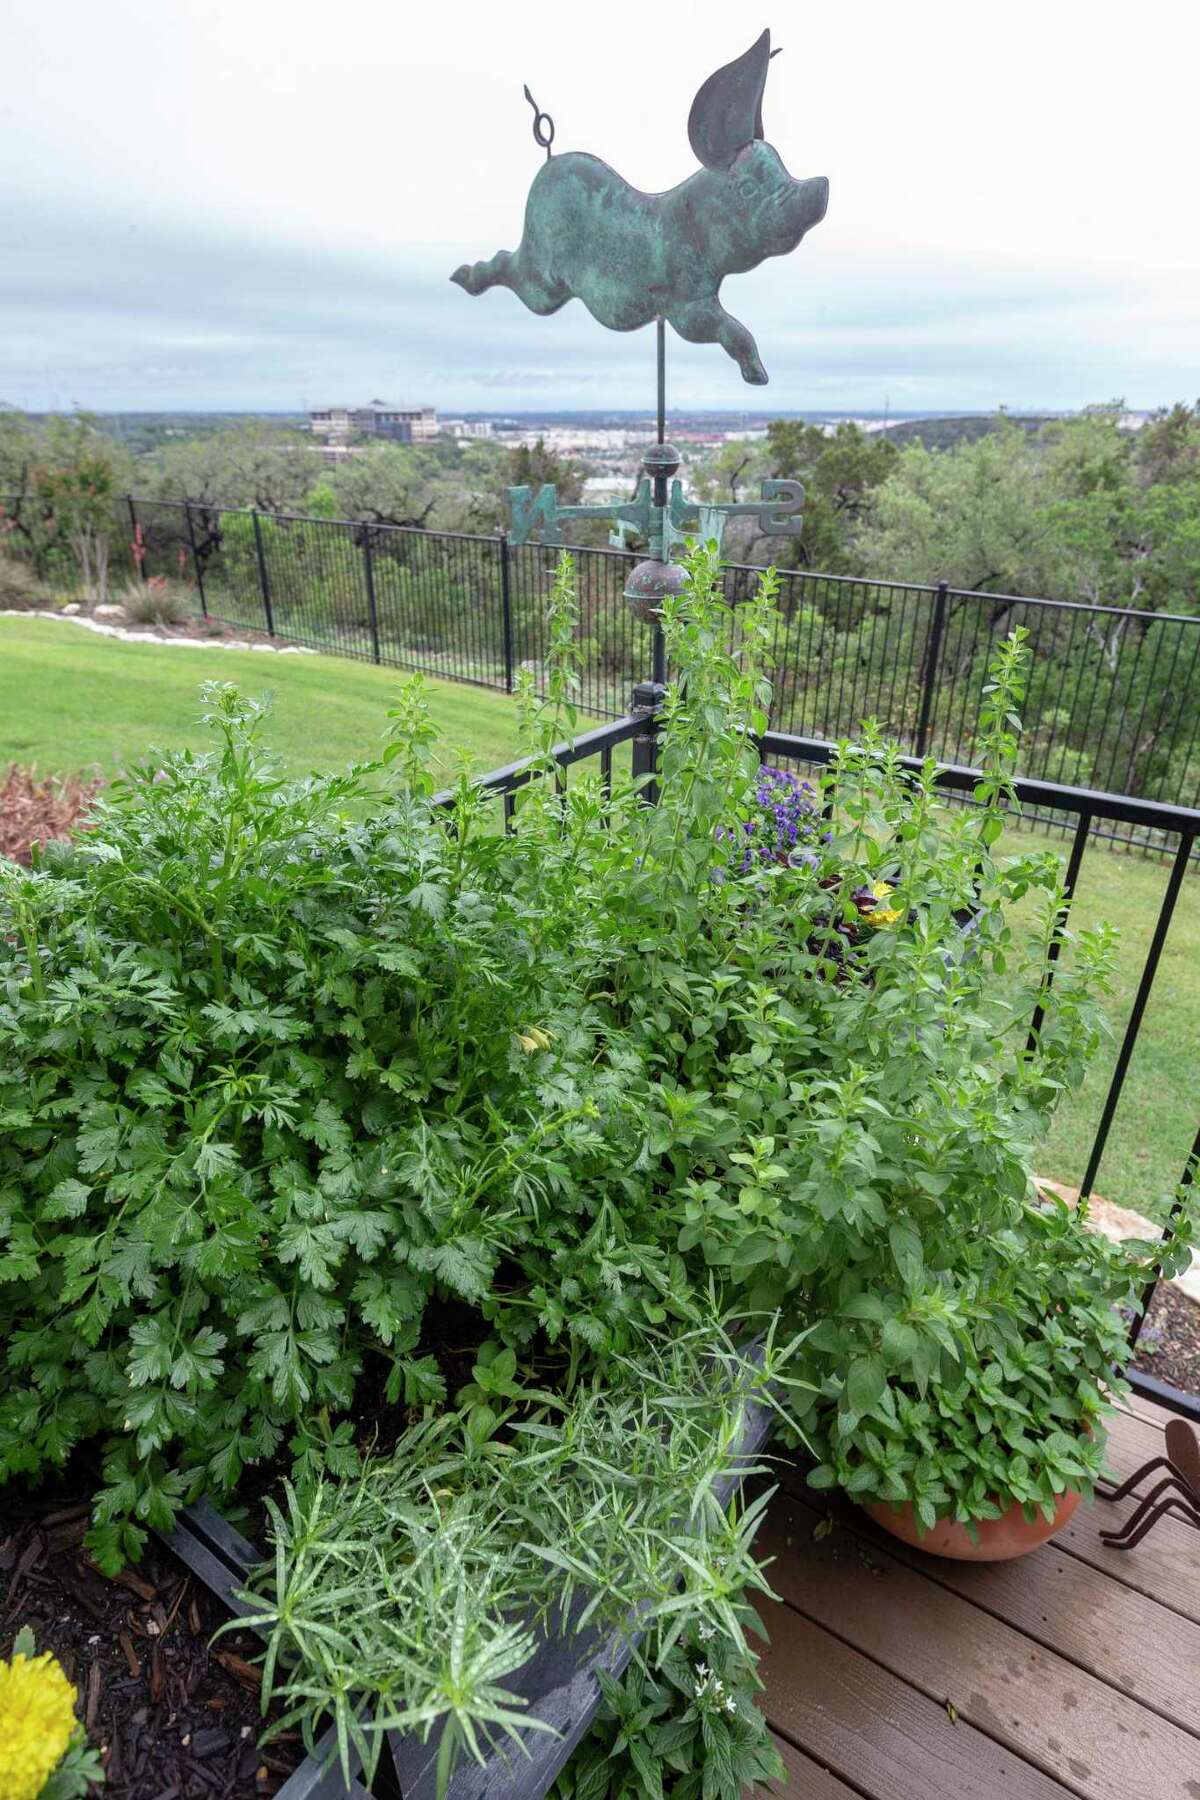 Michelle Barrera keeps a small herb garden in her back yard that she uses in dishes she cooks for her blog, michellesipsandsavors.com.